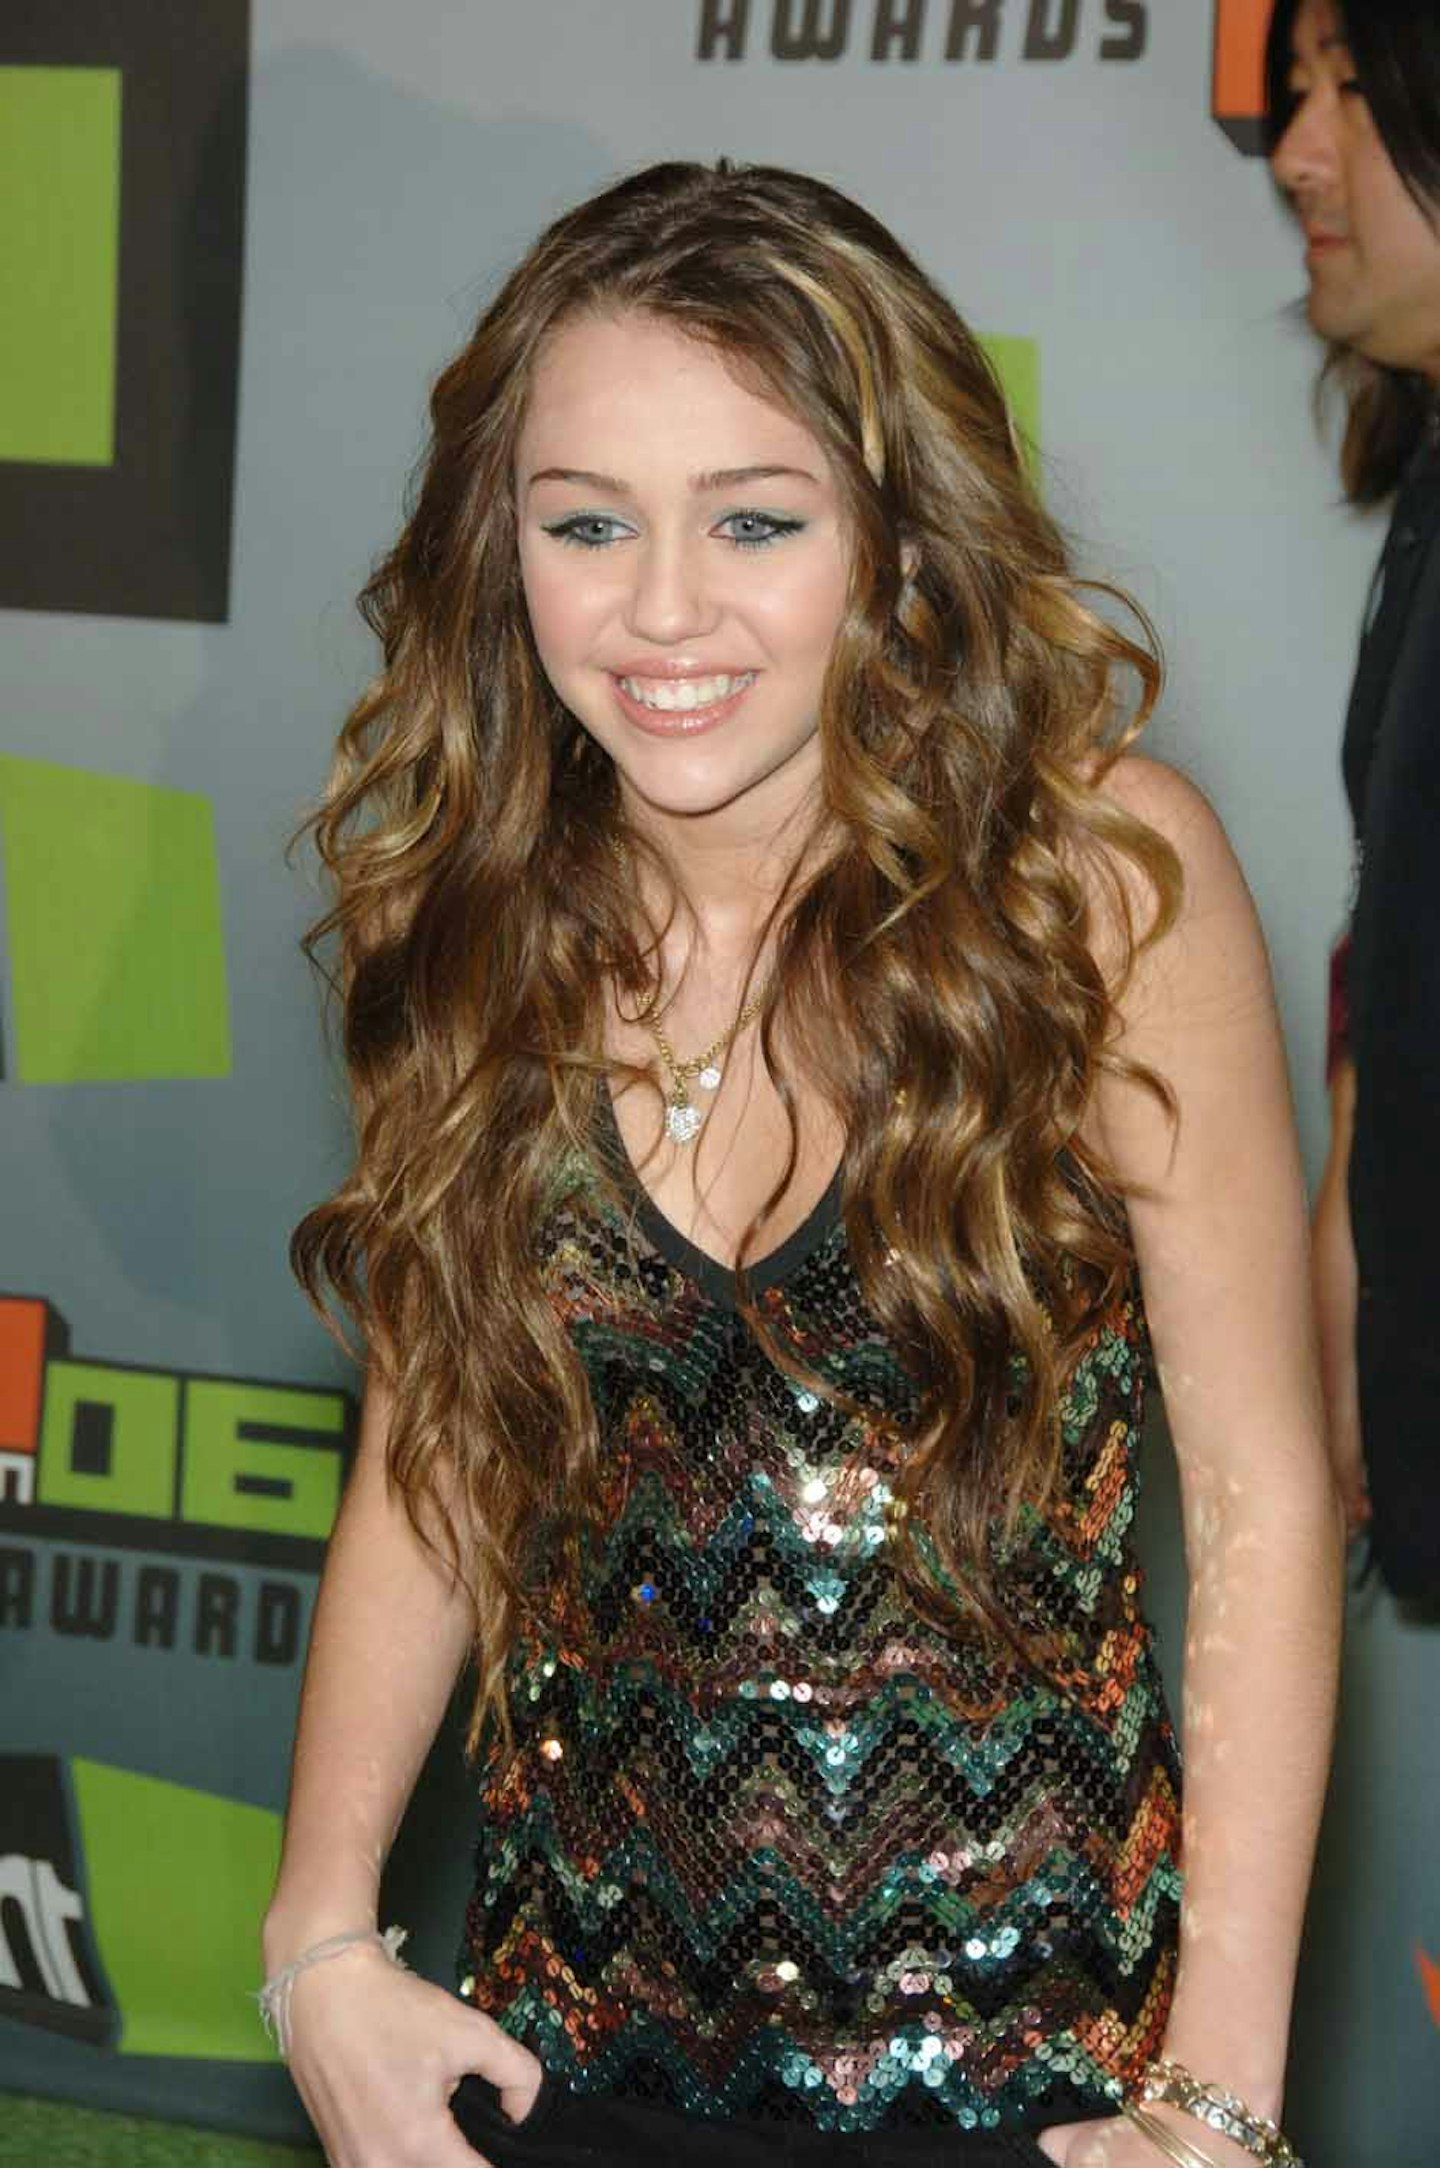 Miley at the VH1 Big in '06 Awards (2006)